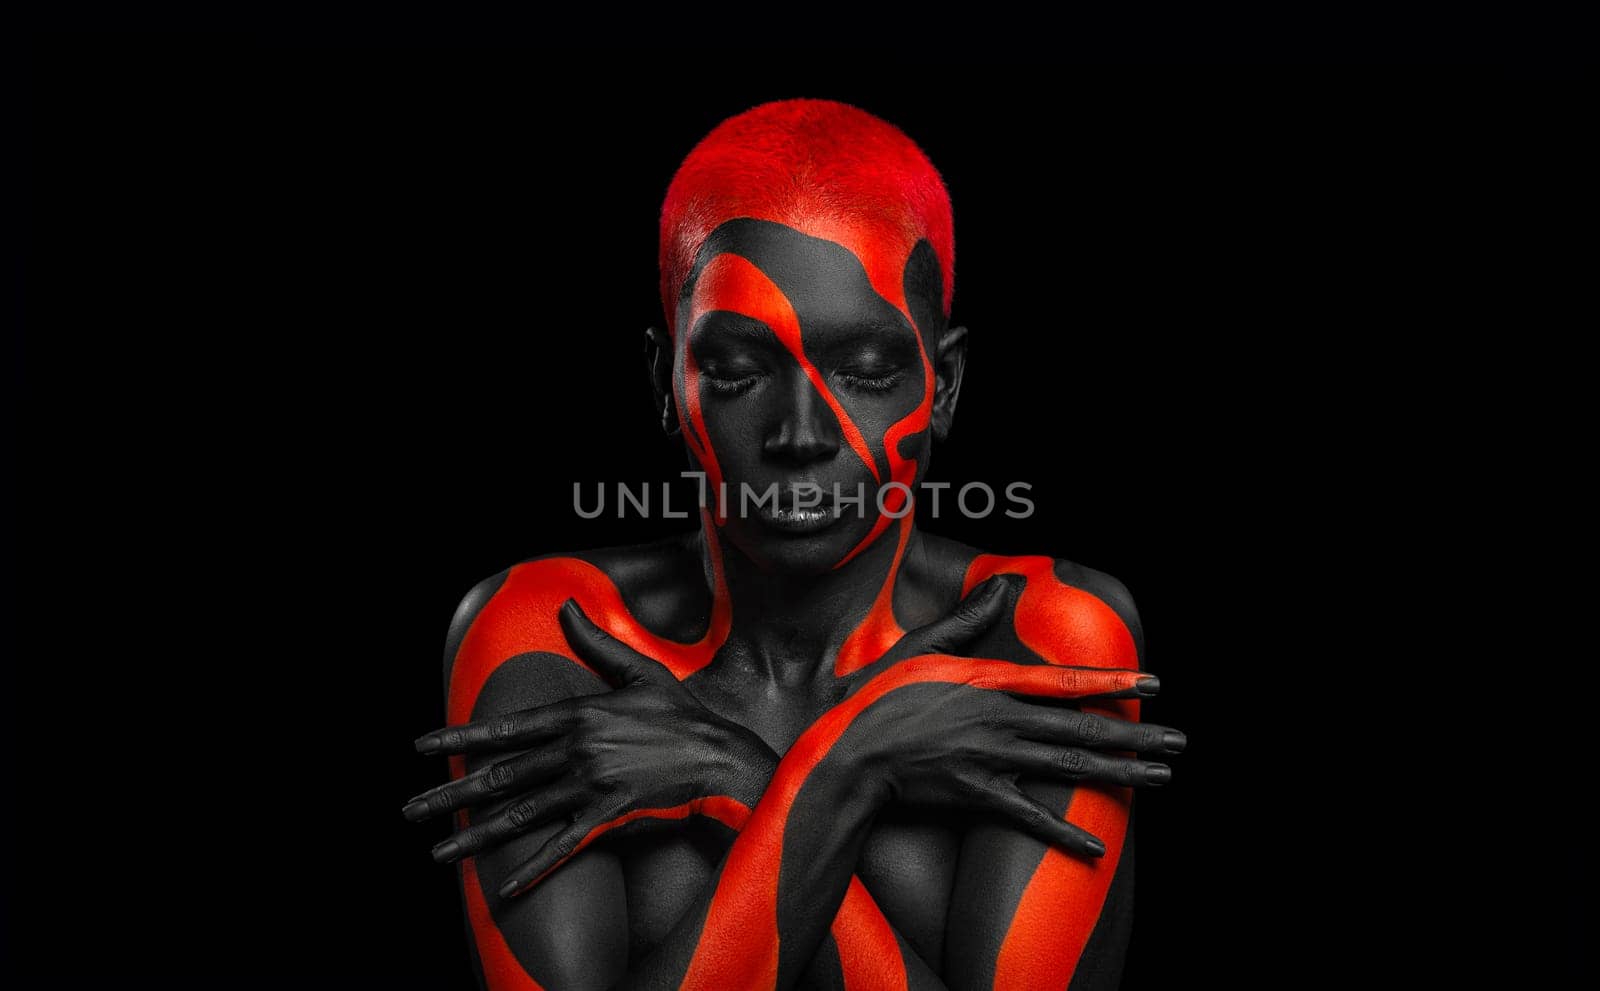 The Art Face. Download High Resolution Picture with Black and yellow body paint on african woman. Create Album Template with Creative Image. Copy space for your text by MikeOrlov